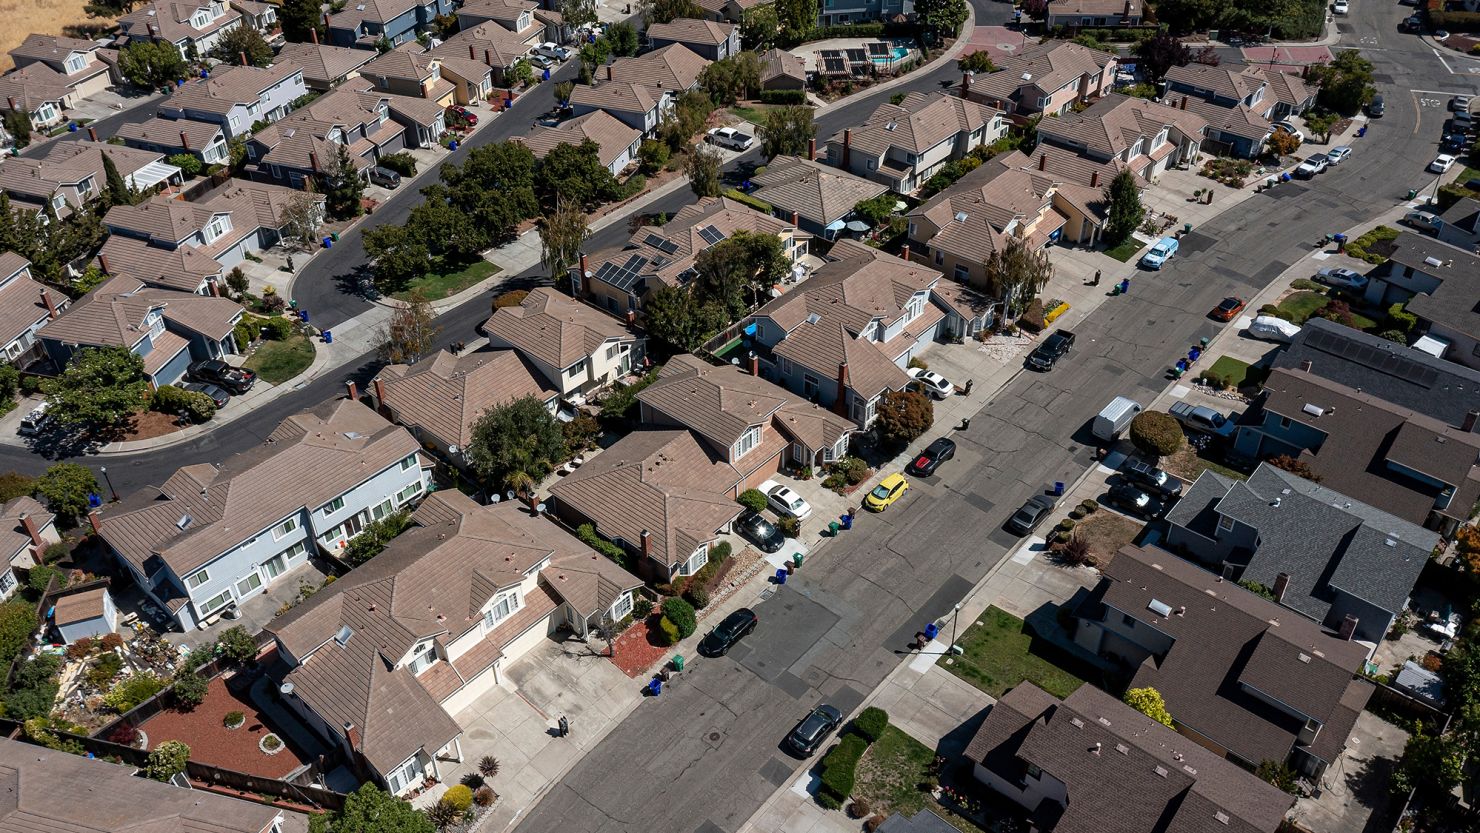 Homes in Hercules, California, US, on Wednesday, Aug. 16, 2023. The US 30-year mortgage rate rose to 7.16% last week, matching the highest since 2001 and crimping both sales and refinancing activity.